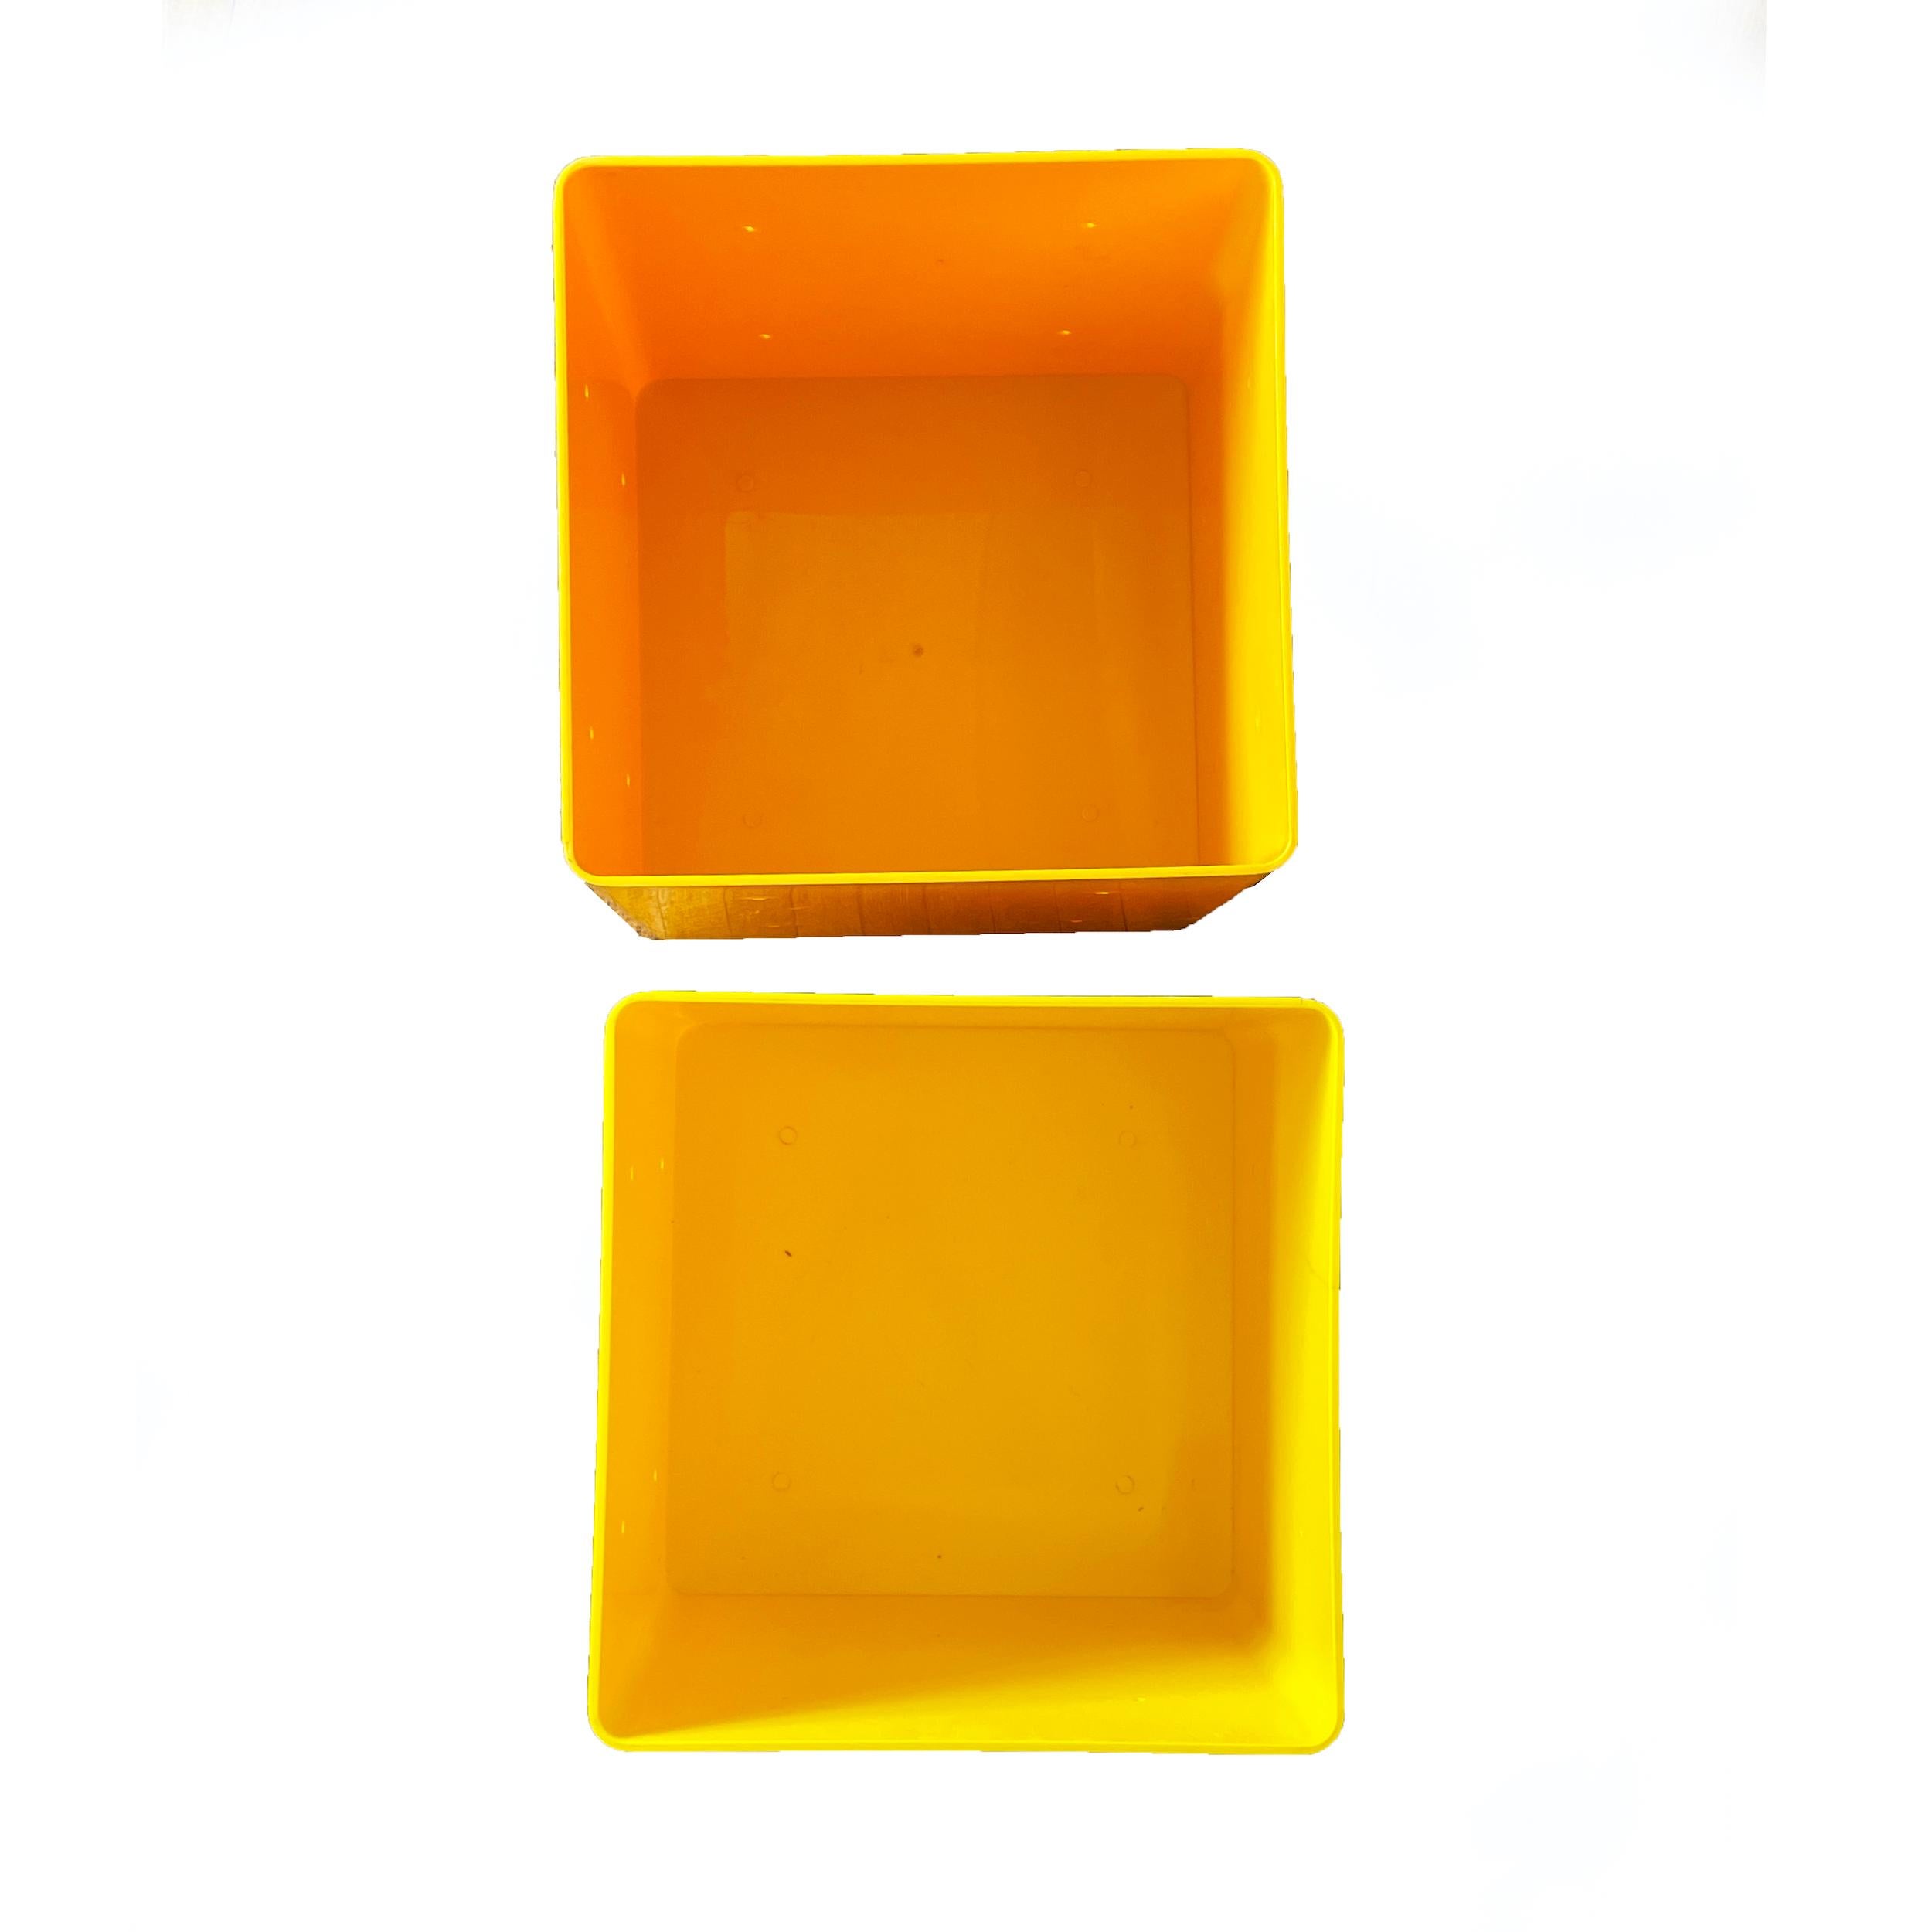 20th Century Pair of Vintage Yellow Plastic Record or Storage Cubes